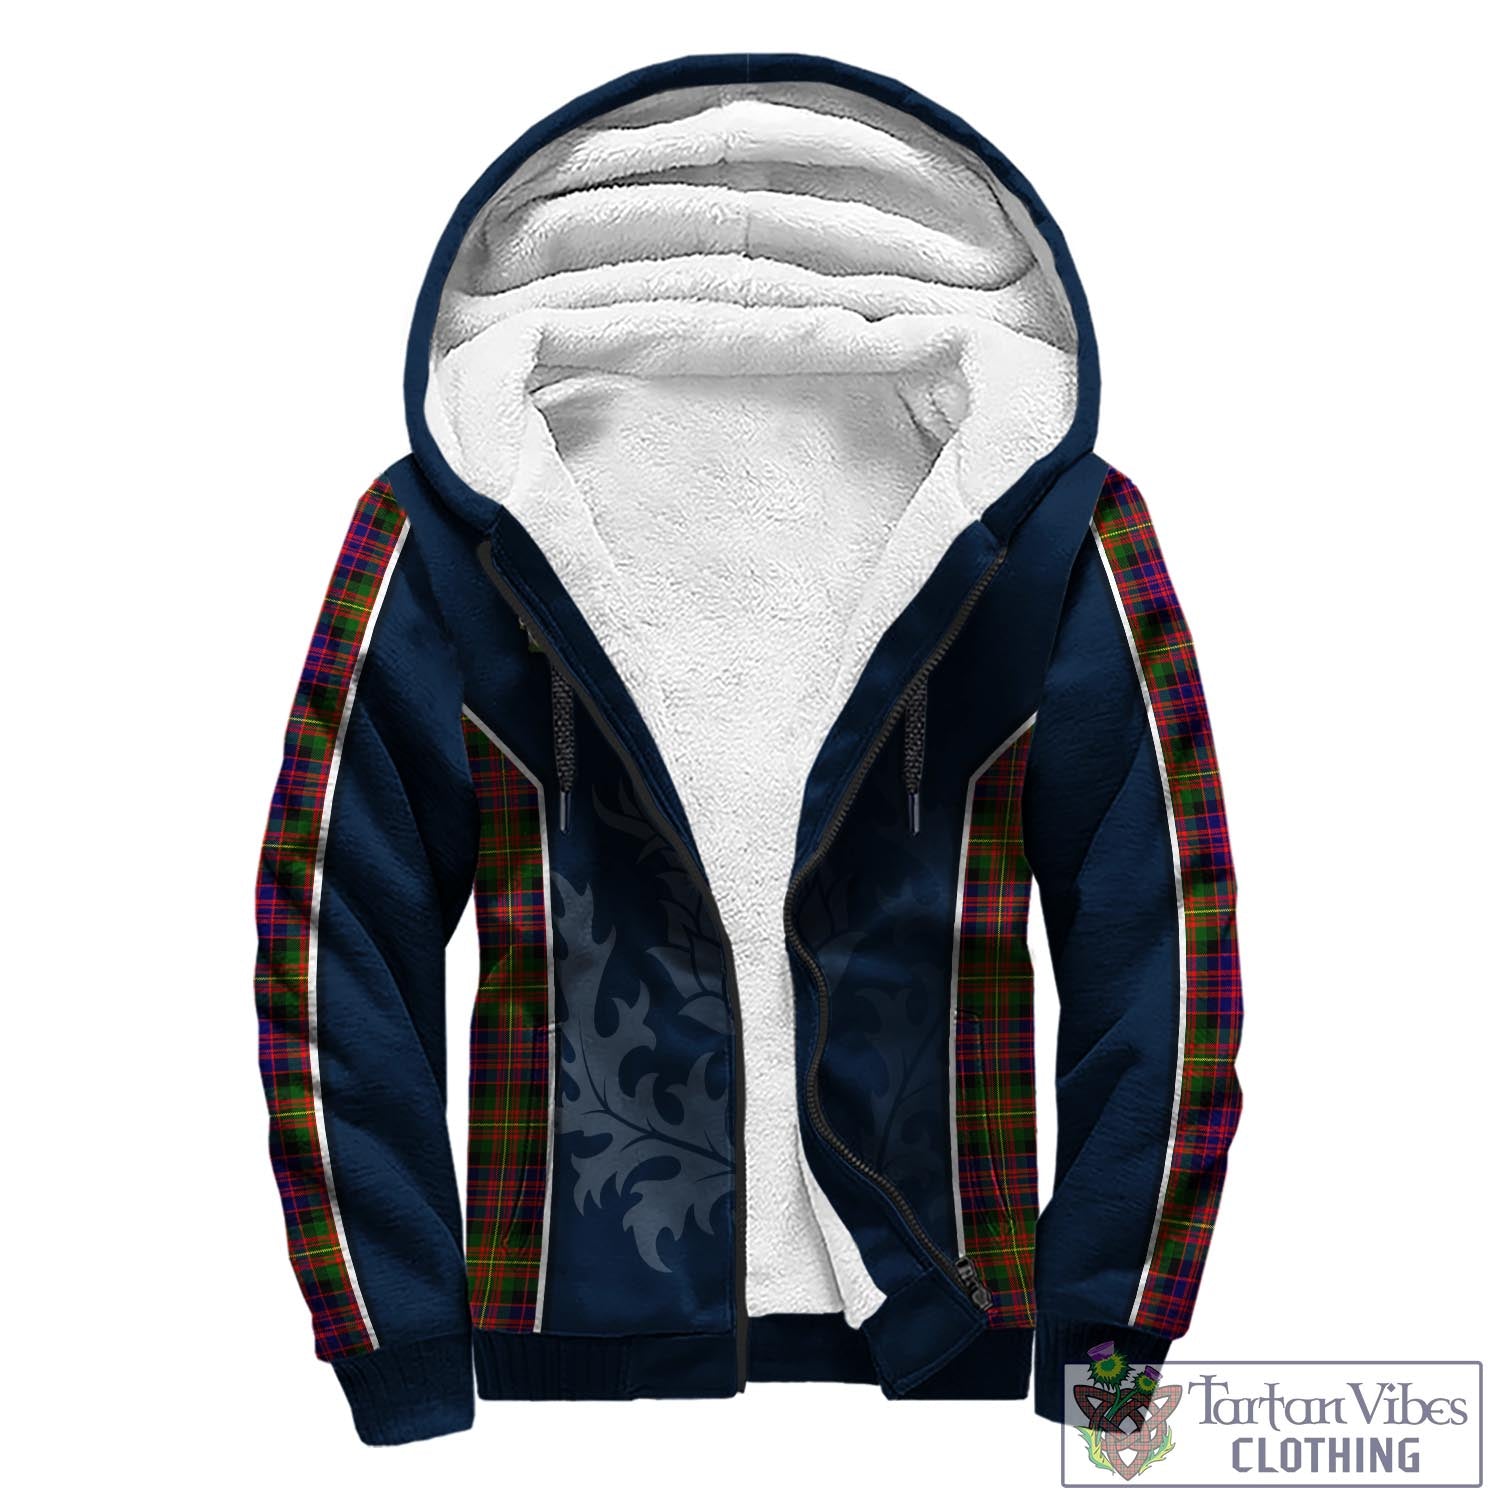 Tartan Vibes Clothing Carnegie Modern Tartan Sherpa Hoodie with Family Crest and Scottish Thistle Vibes Sport Style